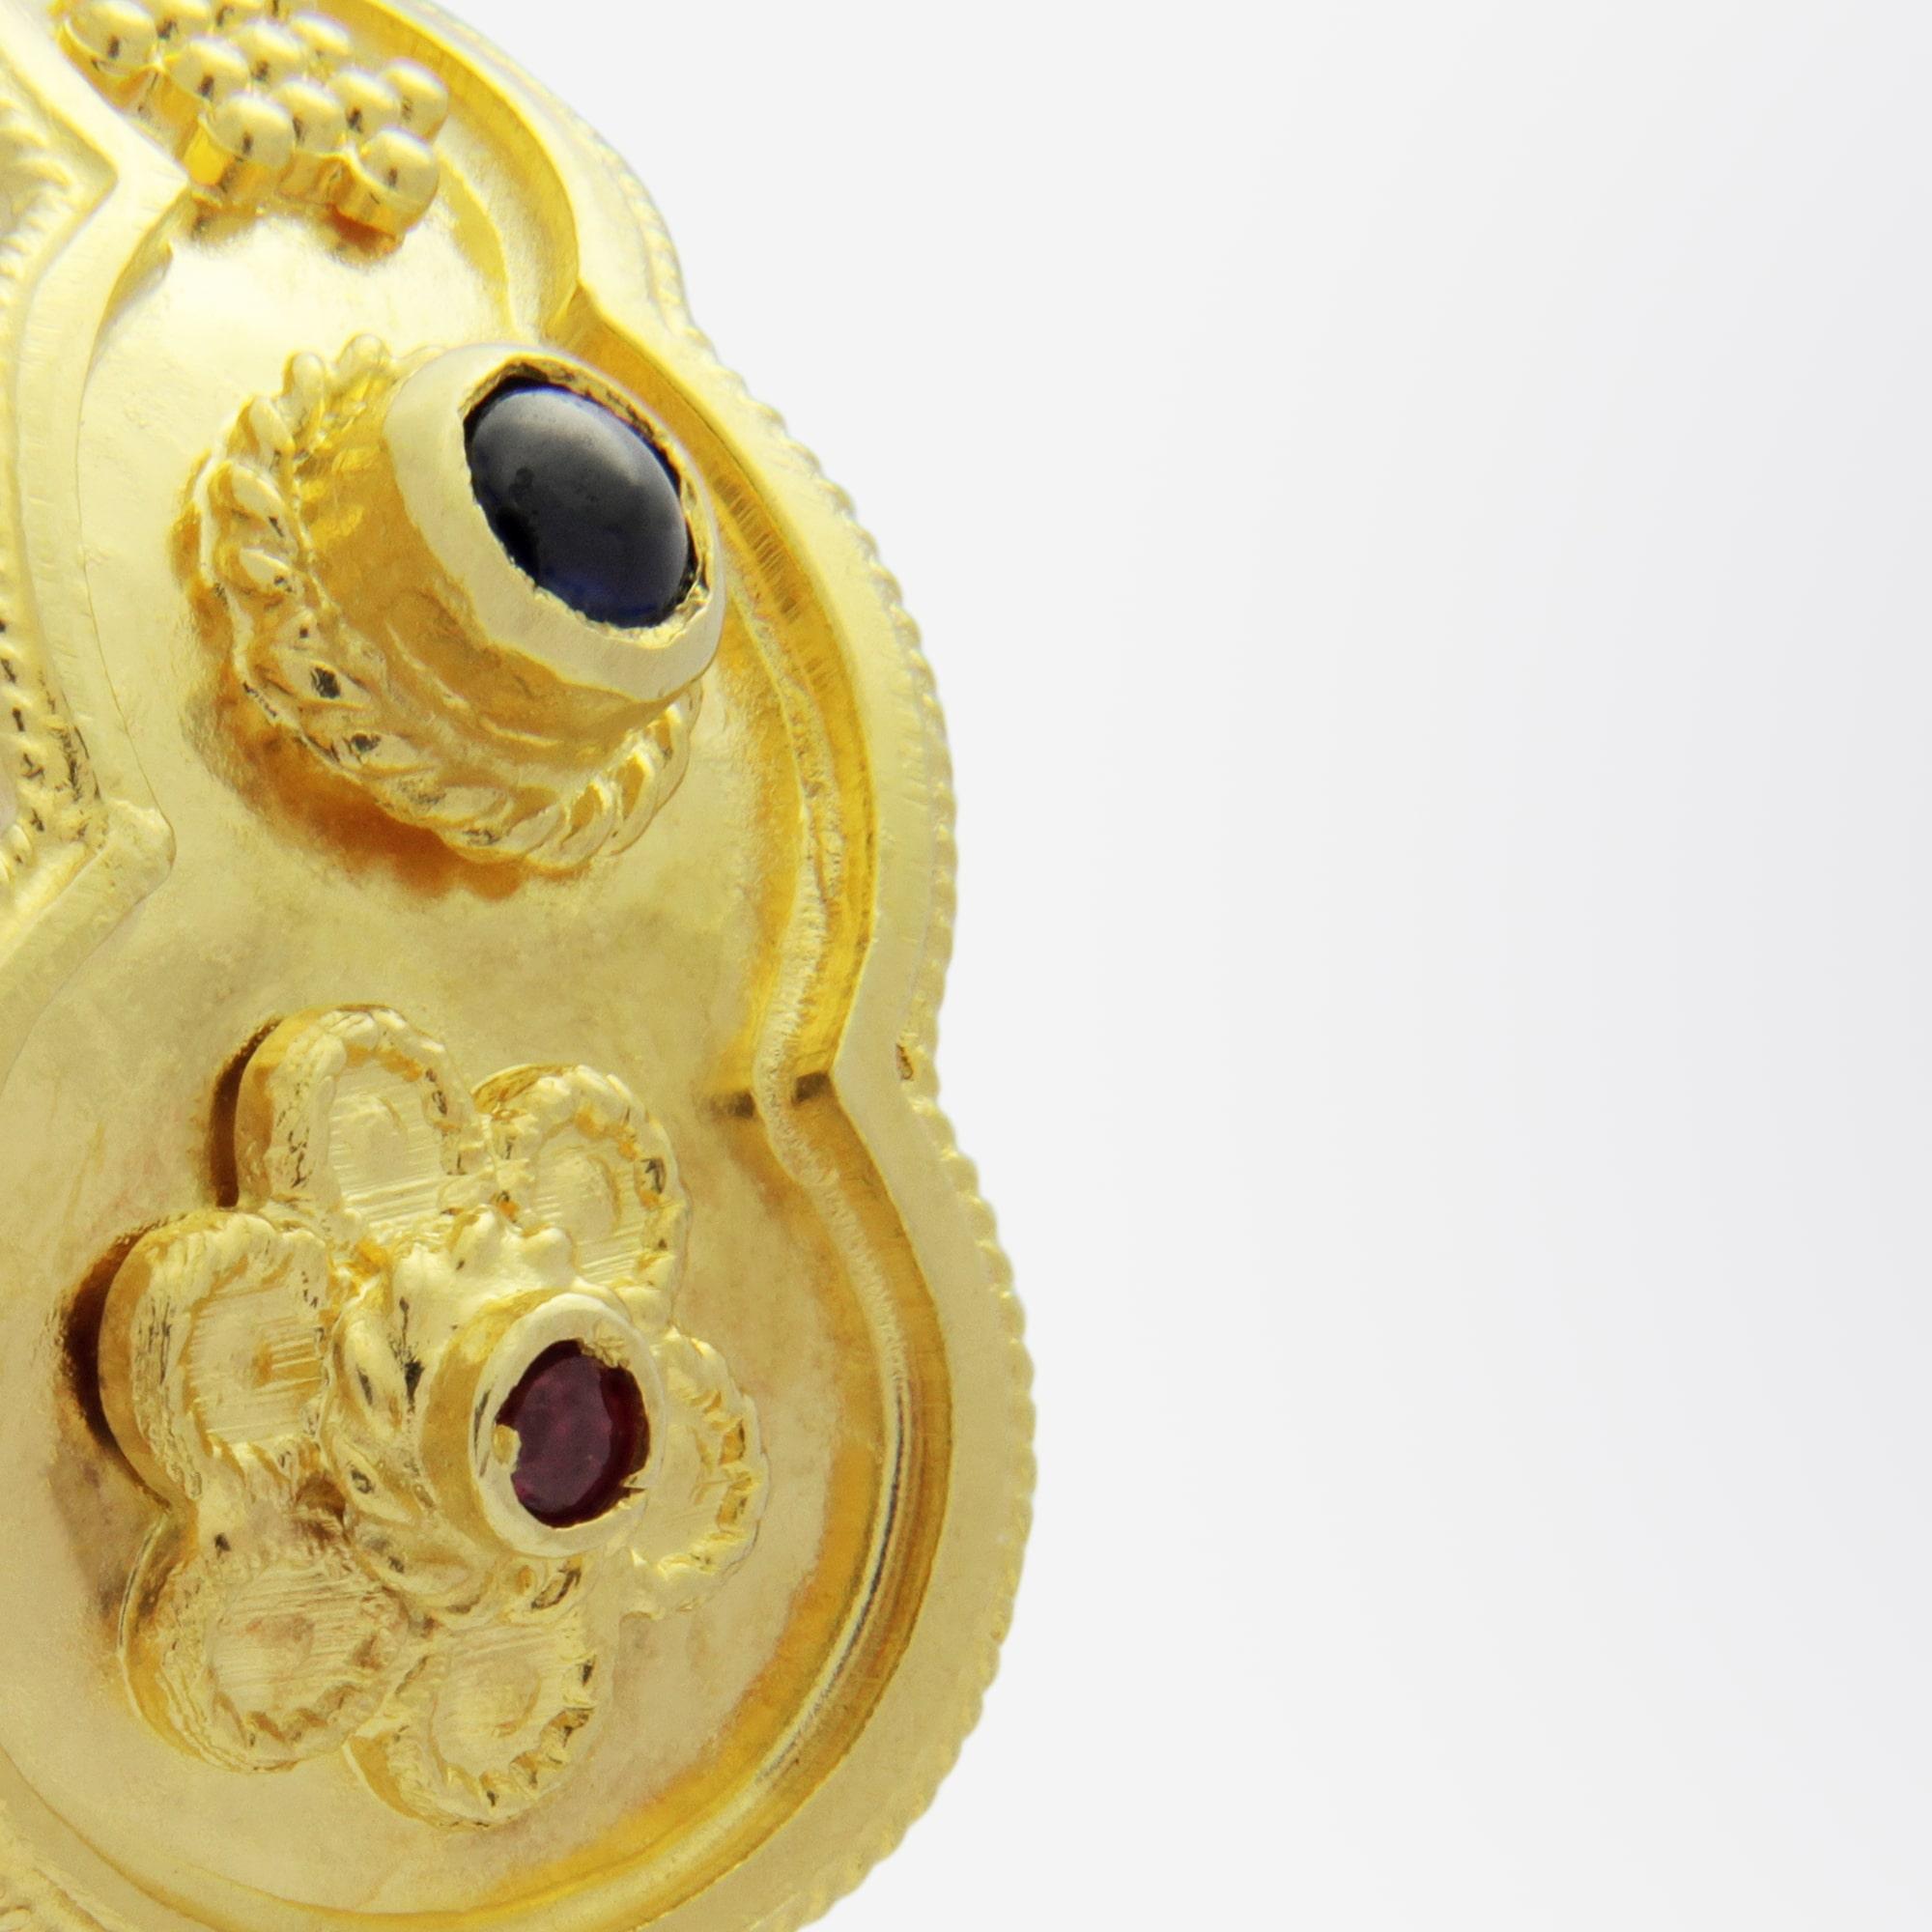 A lovely pair of 18 karat yellow gold, sapphire and ruby ear clips in the Etruscan Revival taste. The curved and scalloped 'tear drop' shaped profile hugs the ear and each clip features a single round cut ruby and a single cabochon cut sapphire